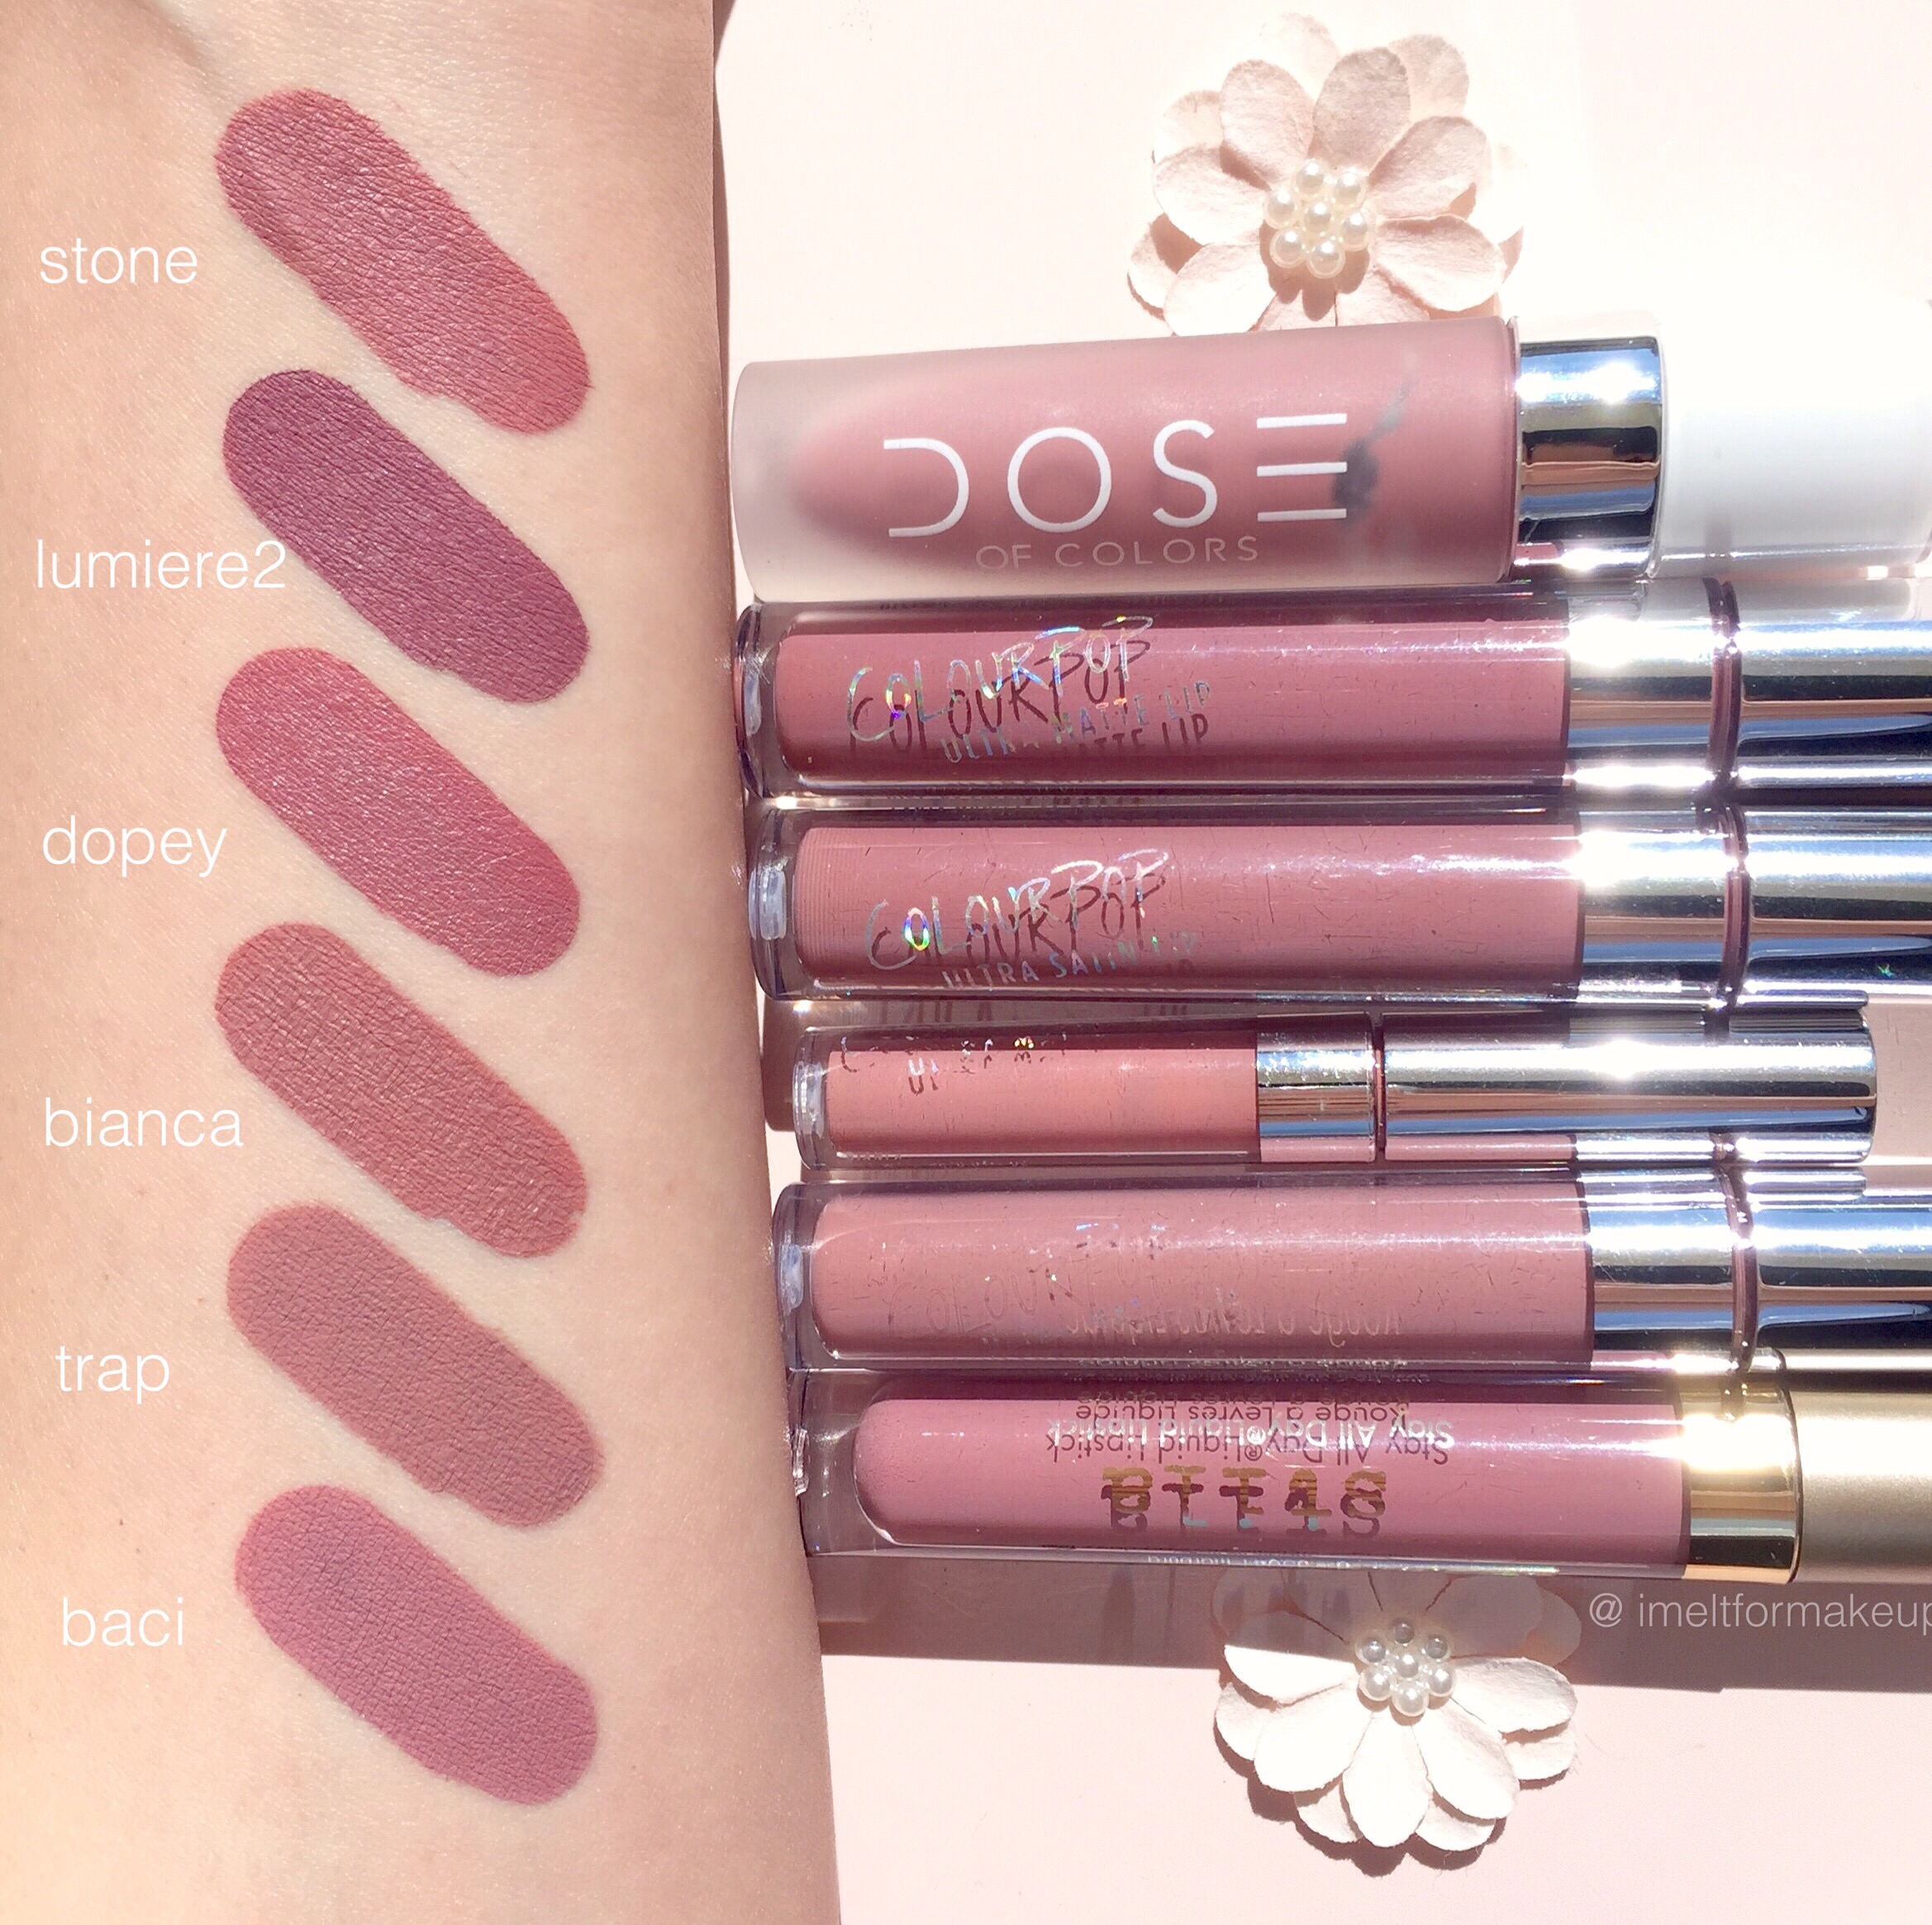 Dose of Colors Stone Liquid Lipstick Dupes - All In The Blush